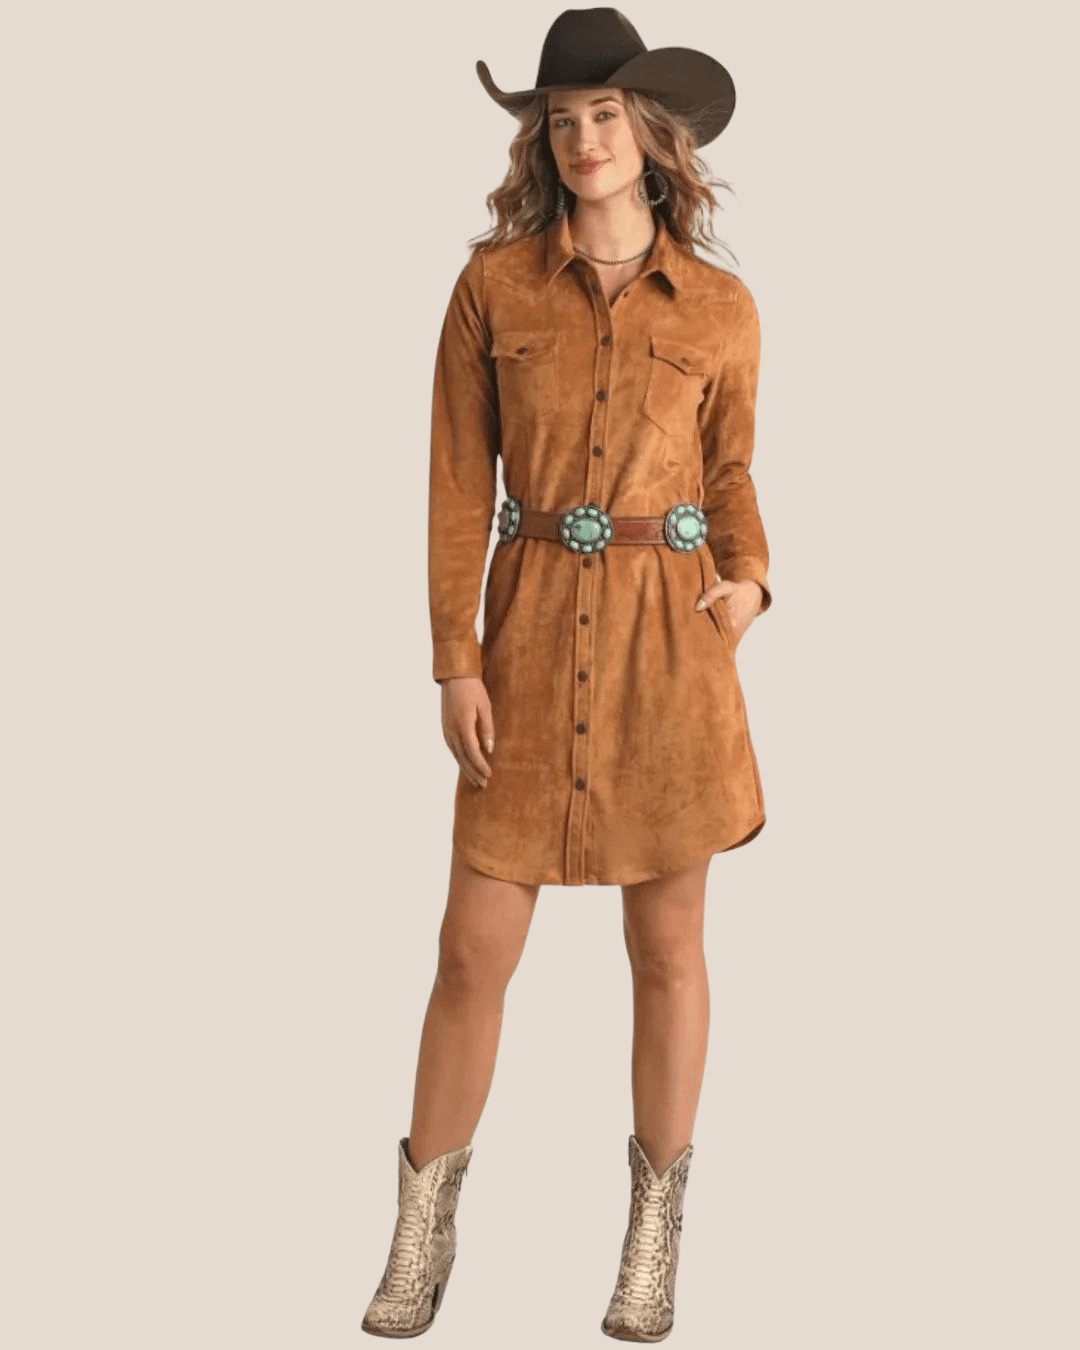 Women's Western Dresses - Painted Cowgirl Western Store